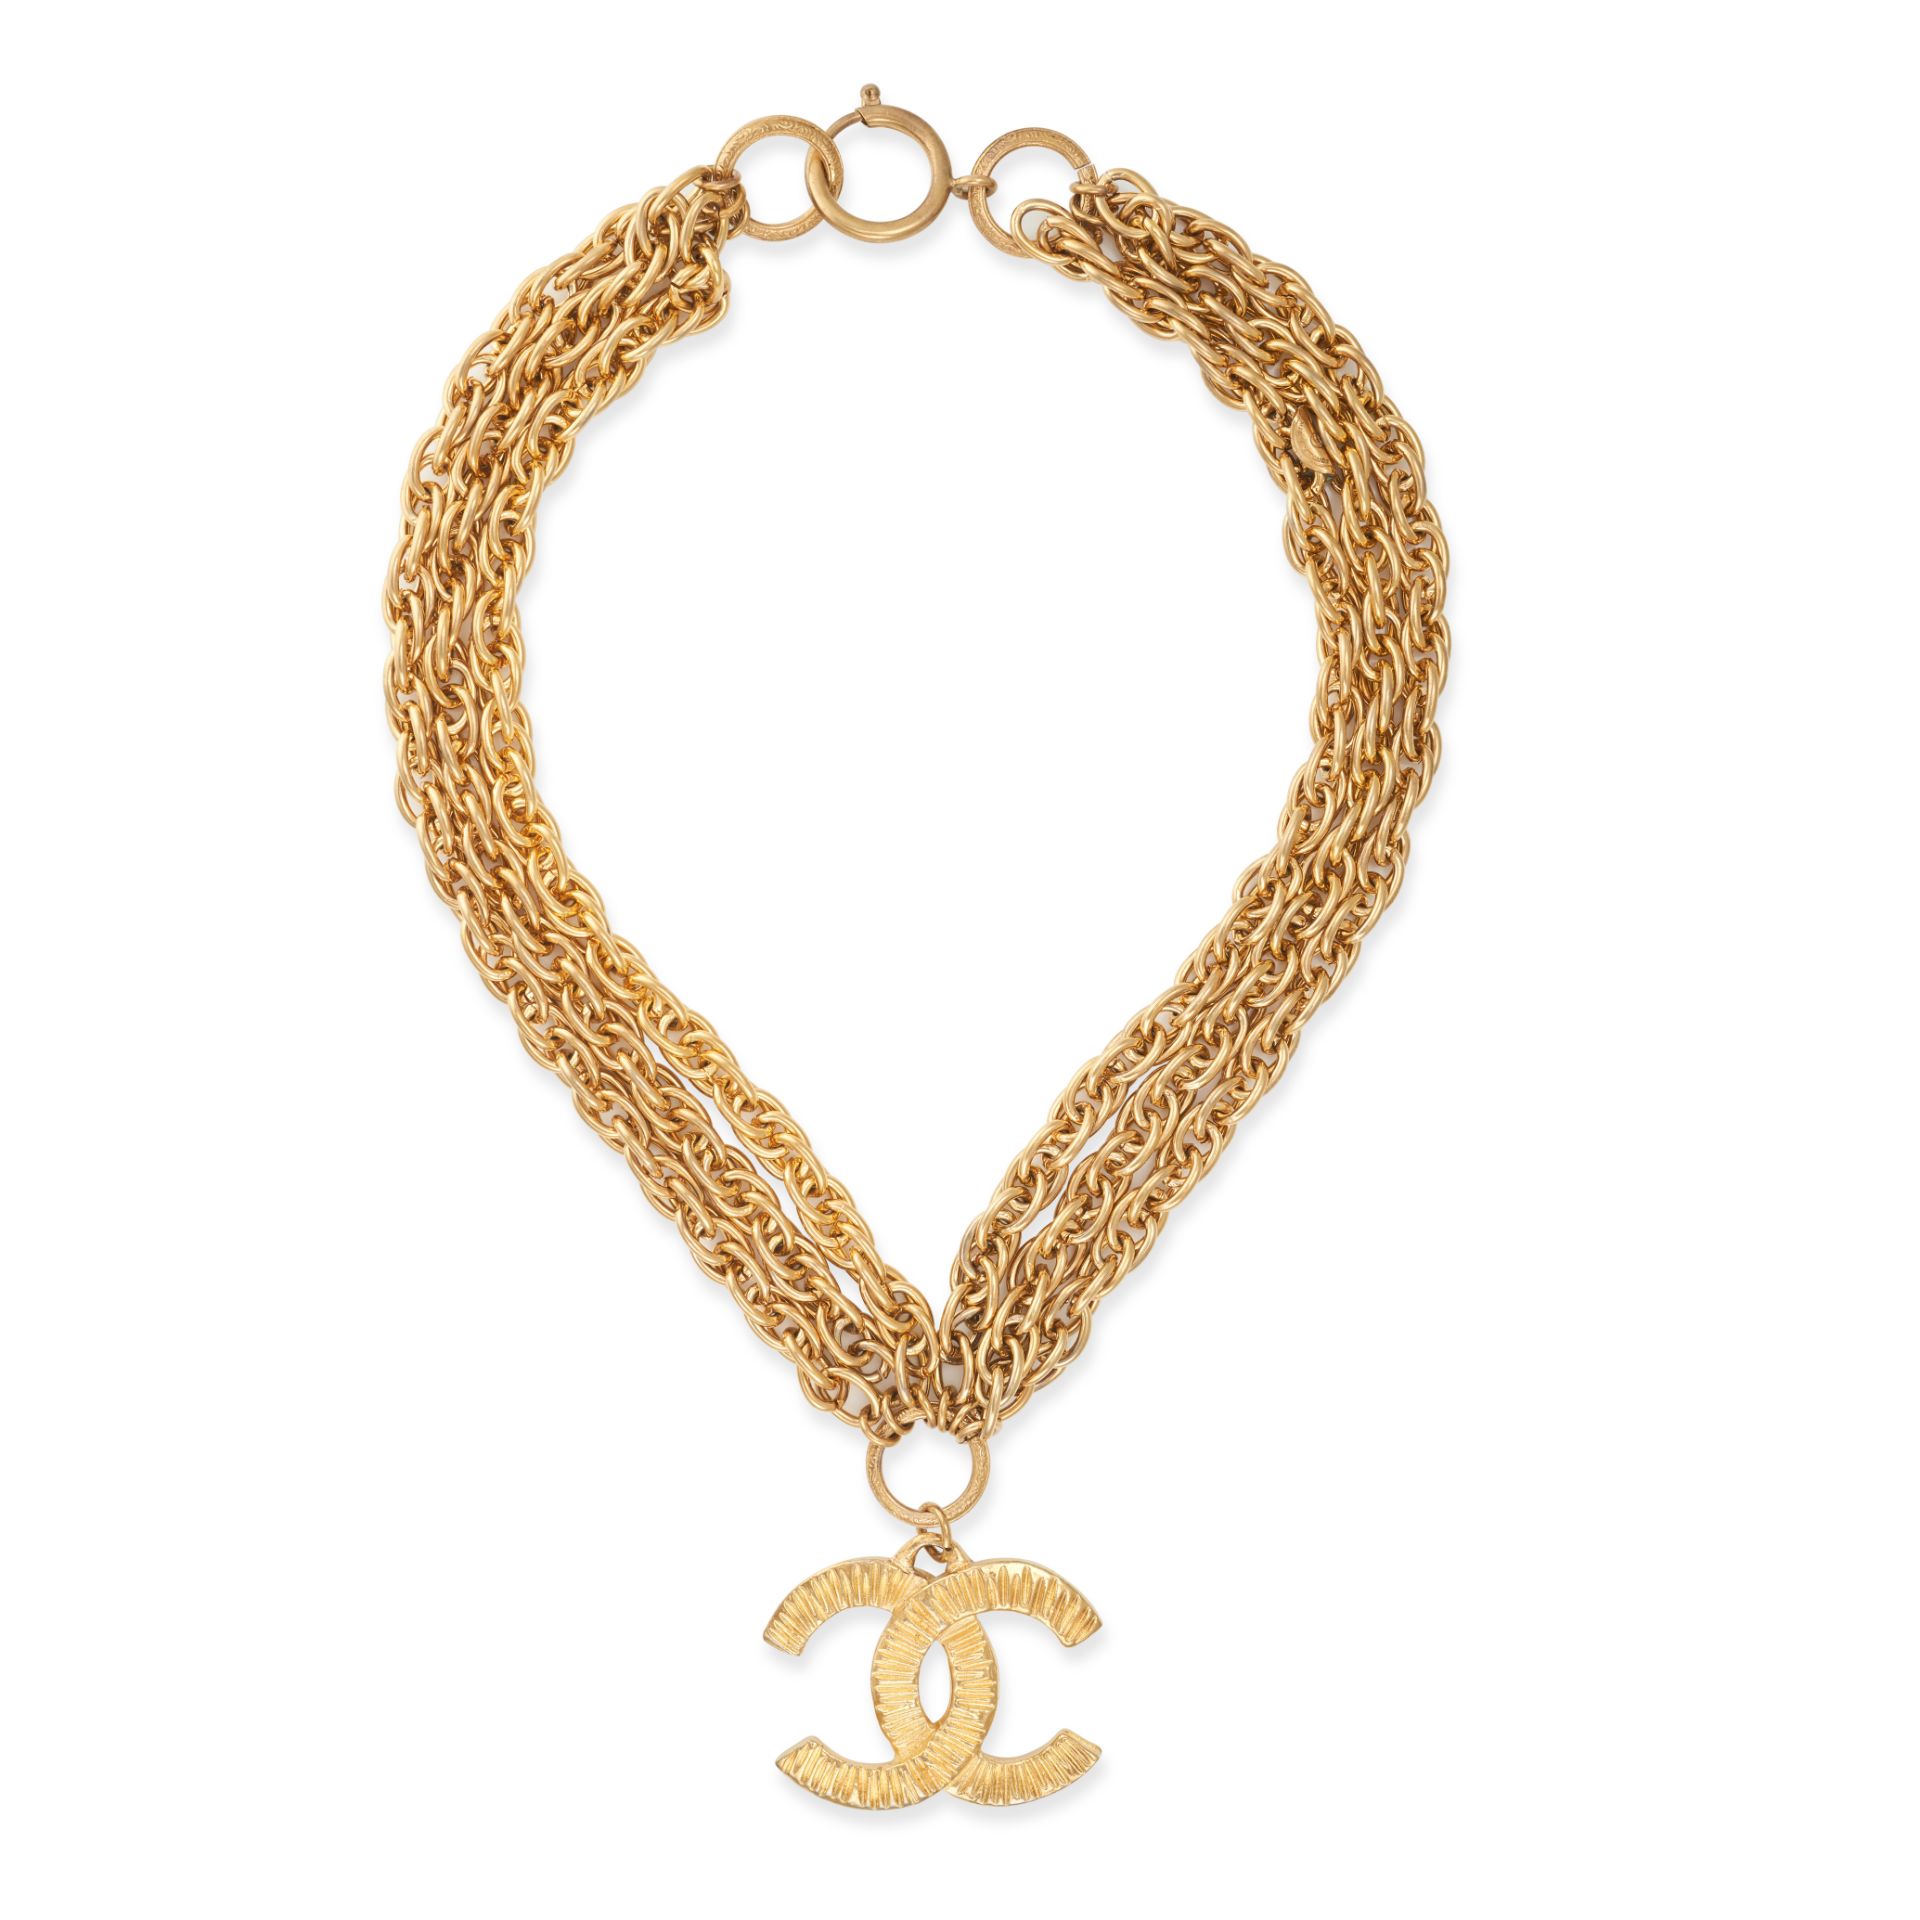 CHANEL, A VINTAGE PENDANT AND CHAIN comprising a textured pendant with interlocking CC motifs, su...